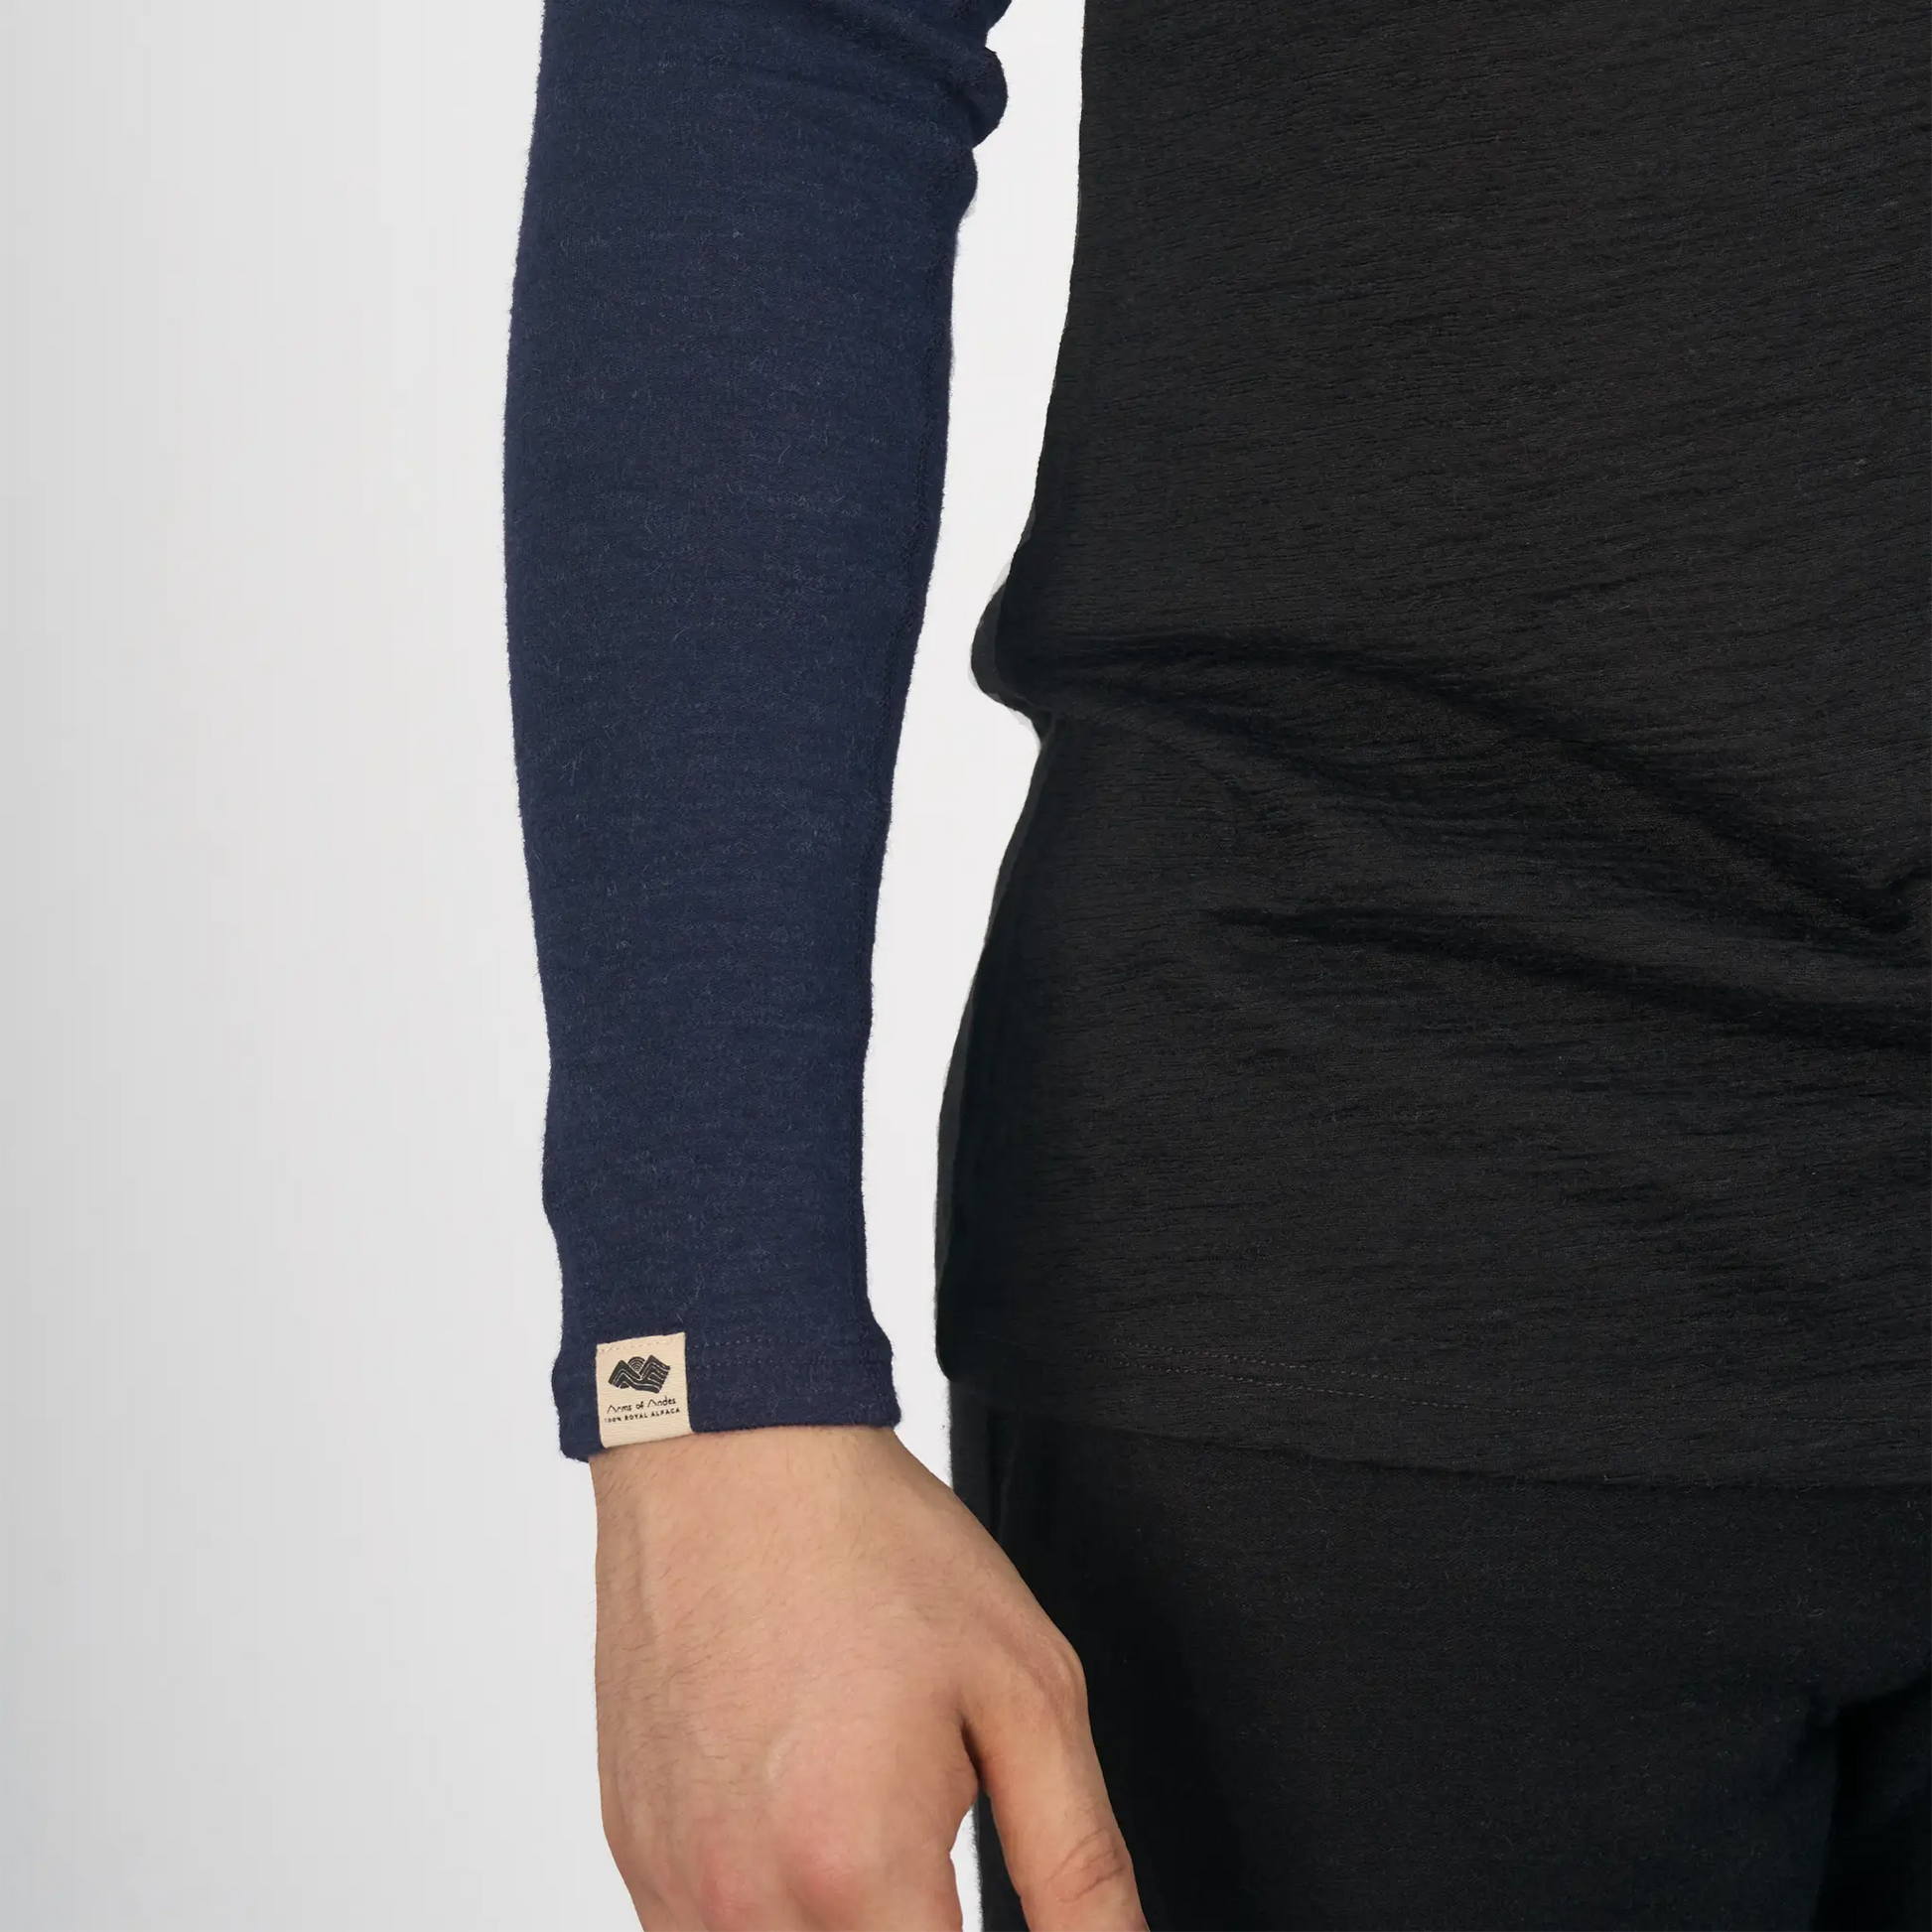 mens moisture wicking sleeve midweight color navy blue